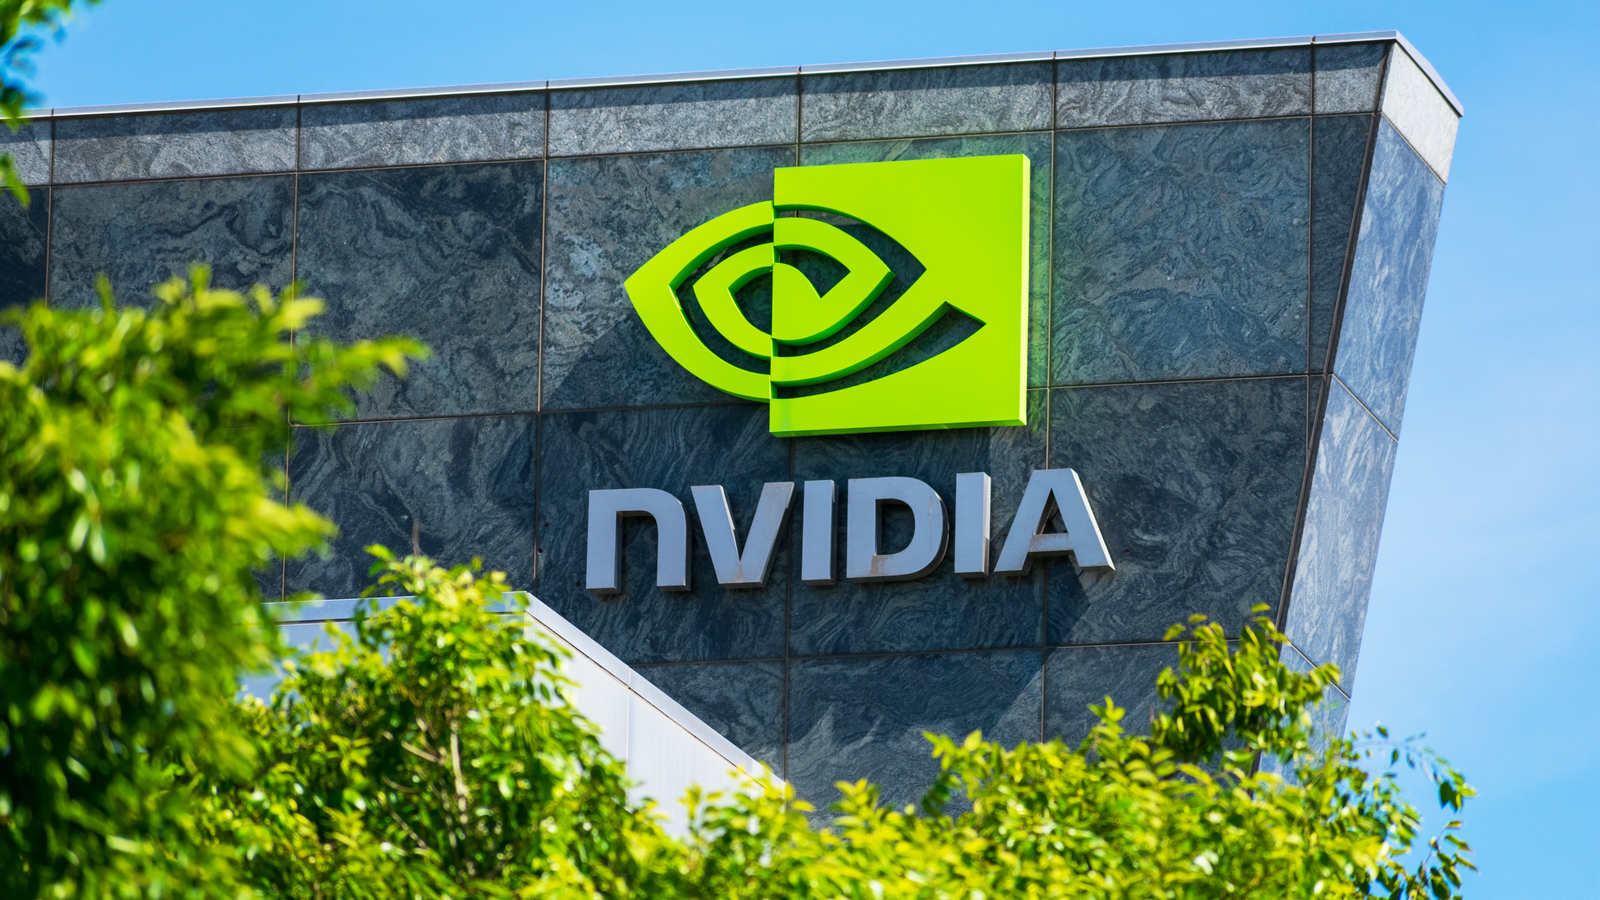 Nvidia (NVDA Stock) logo and sign on headquarters. Blurred foreground with green trees